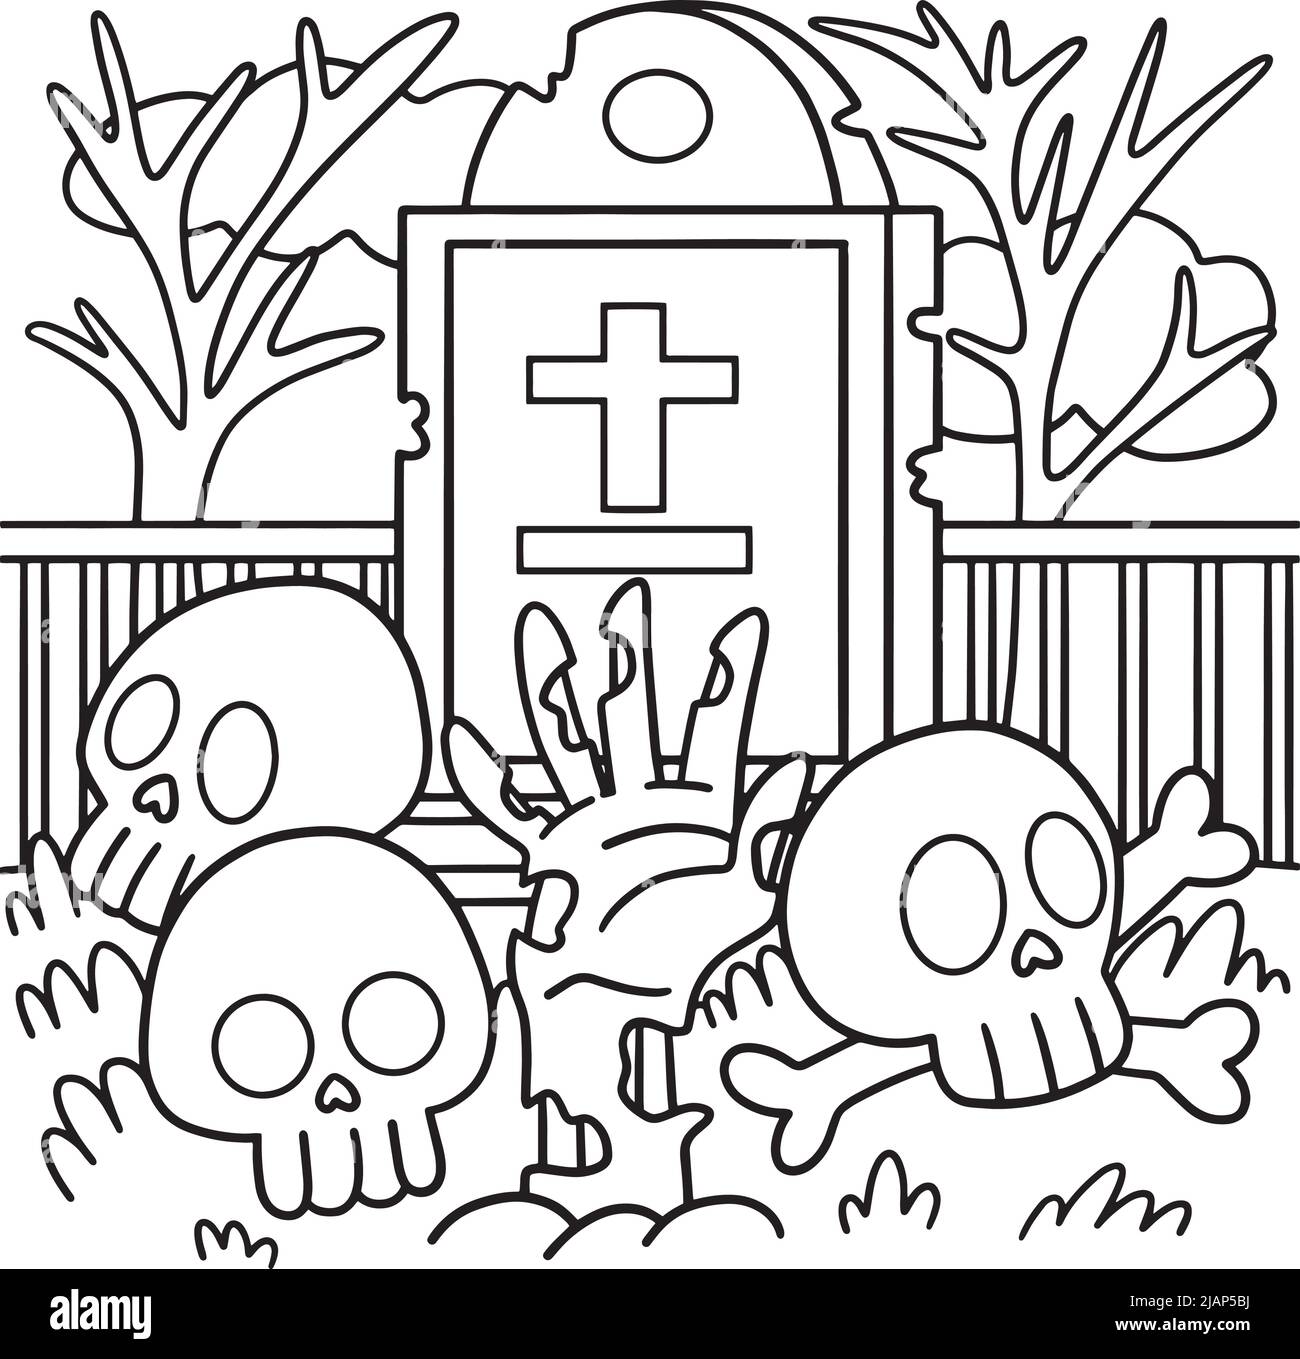 Skull Halloween Coloring Page for Kids Stock Vector Image & Art - Alamy